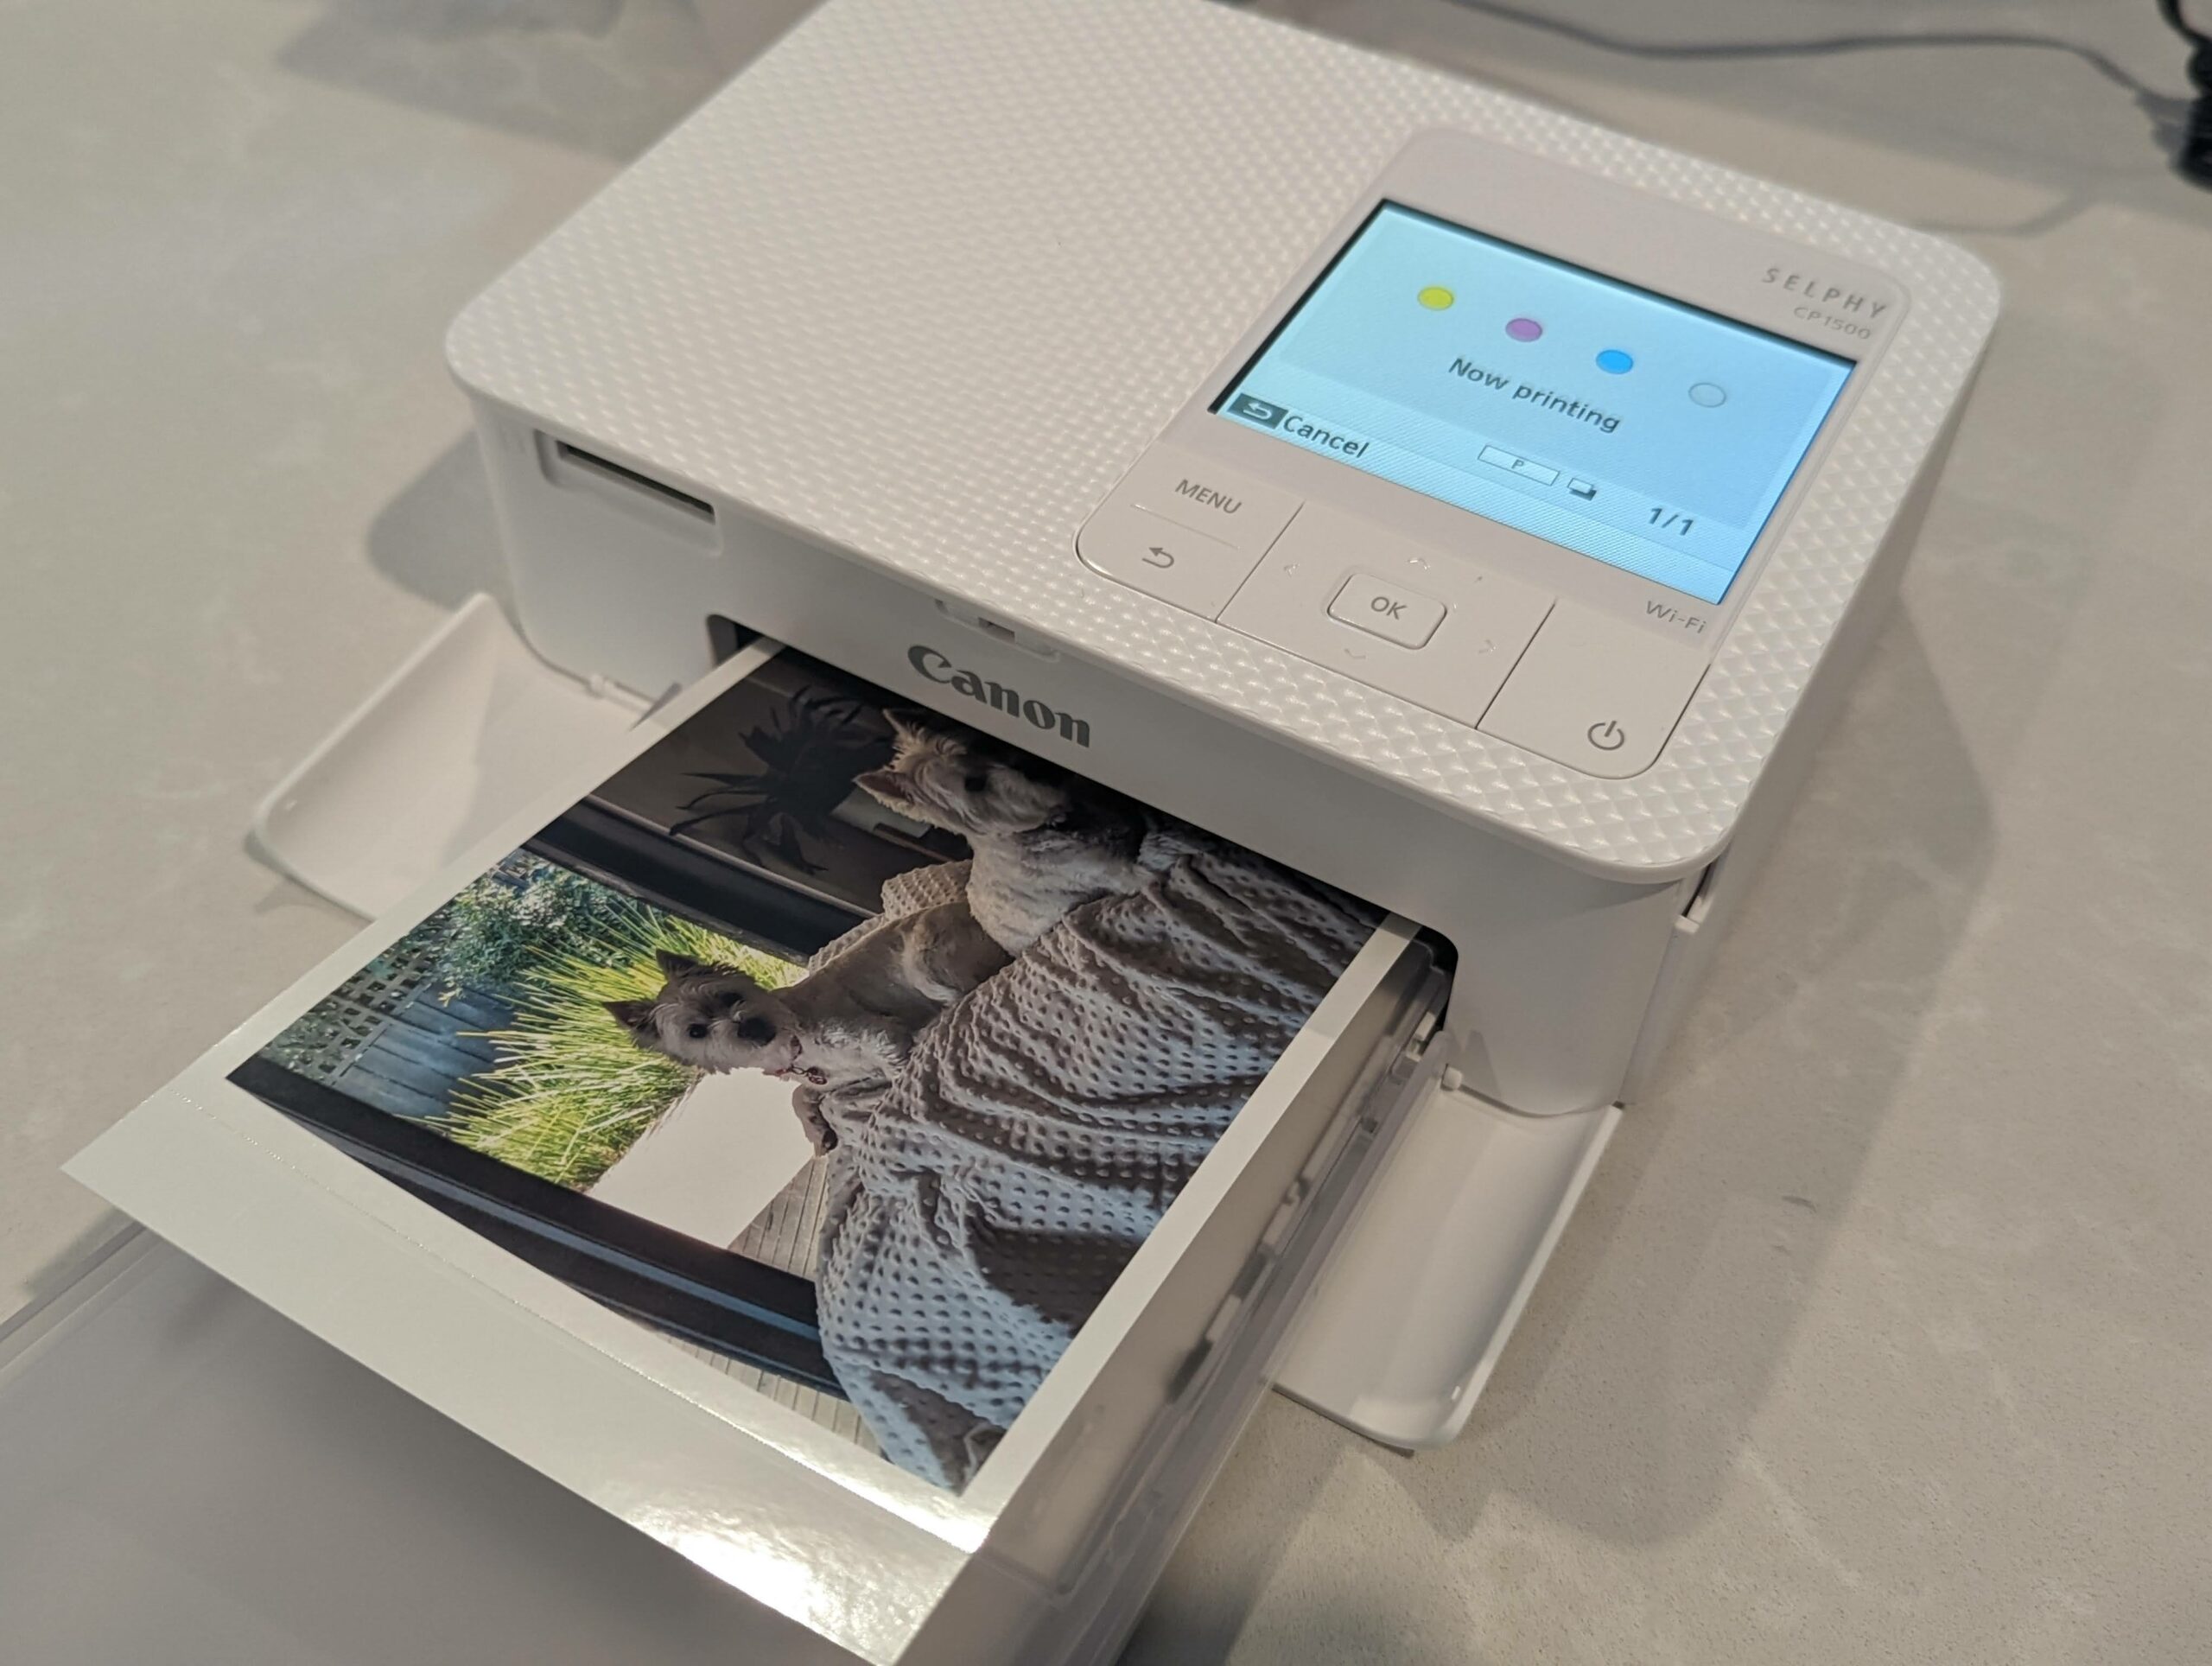 SELPHY CP1500: Print Fun Into Your Life - Canon South & Southeast Asia